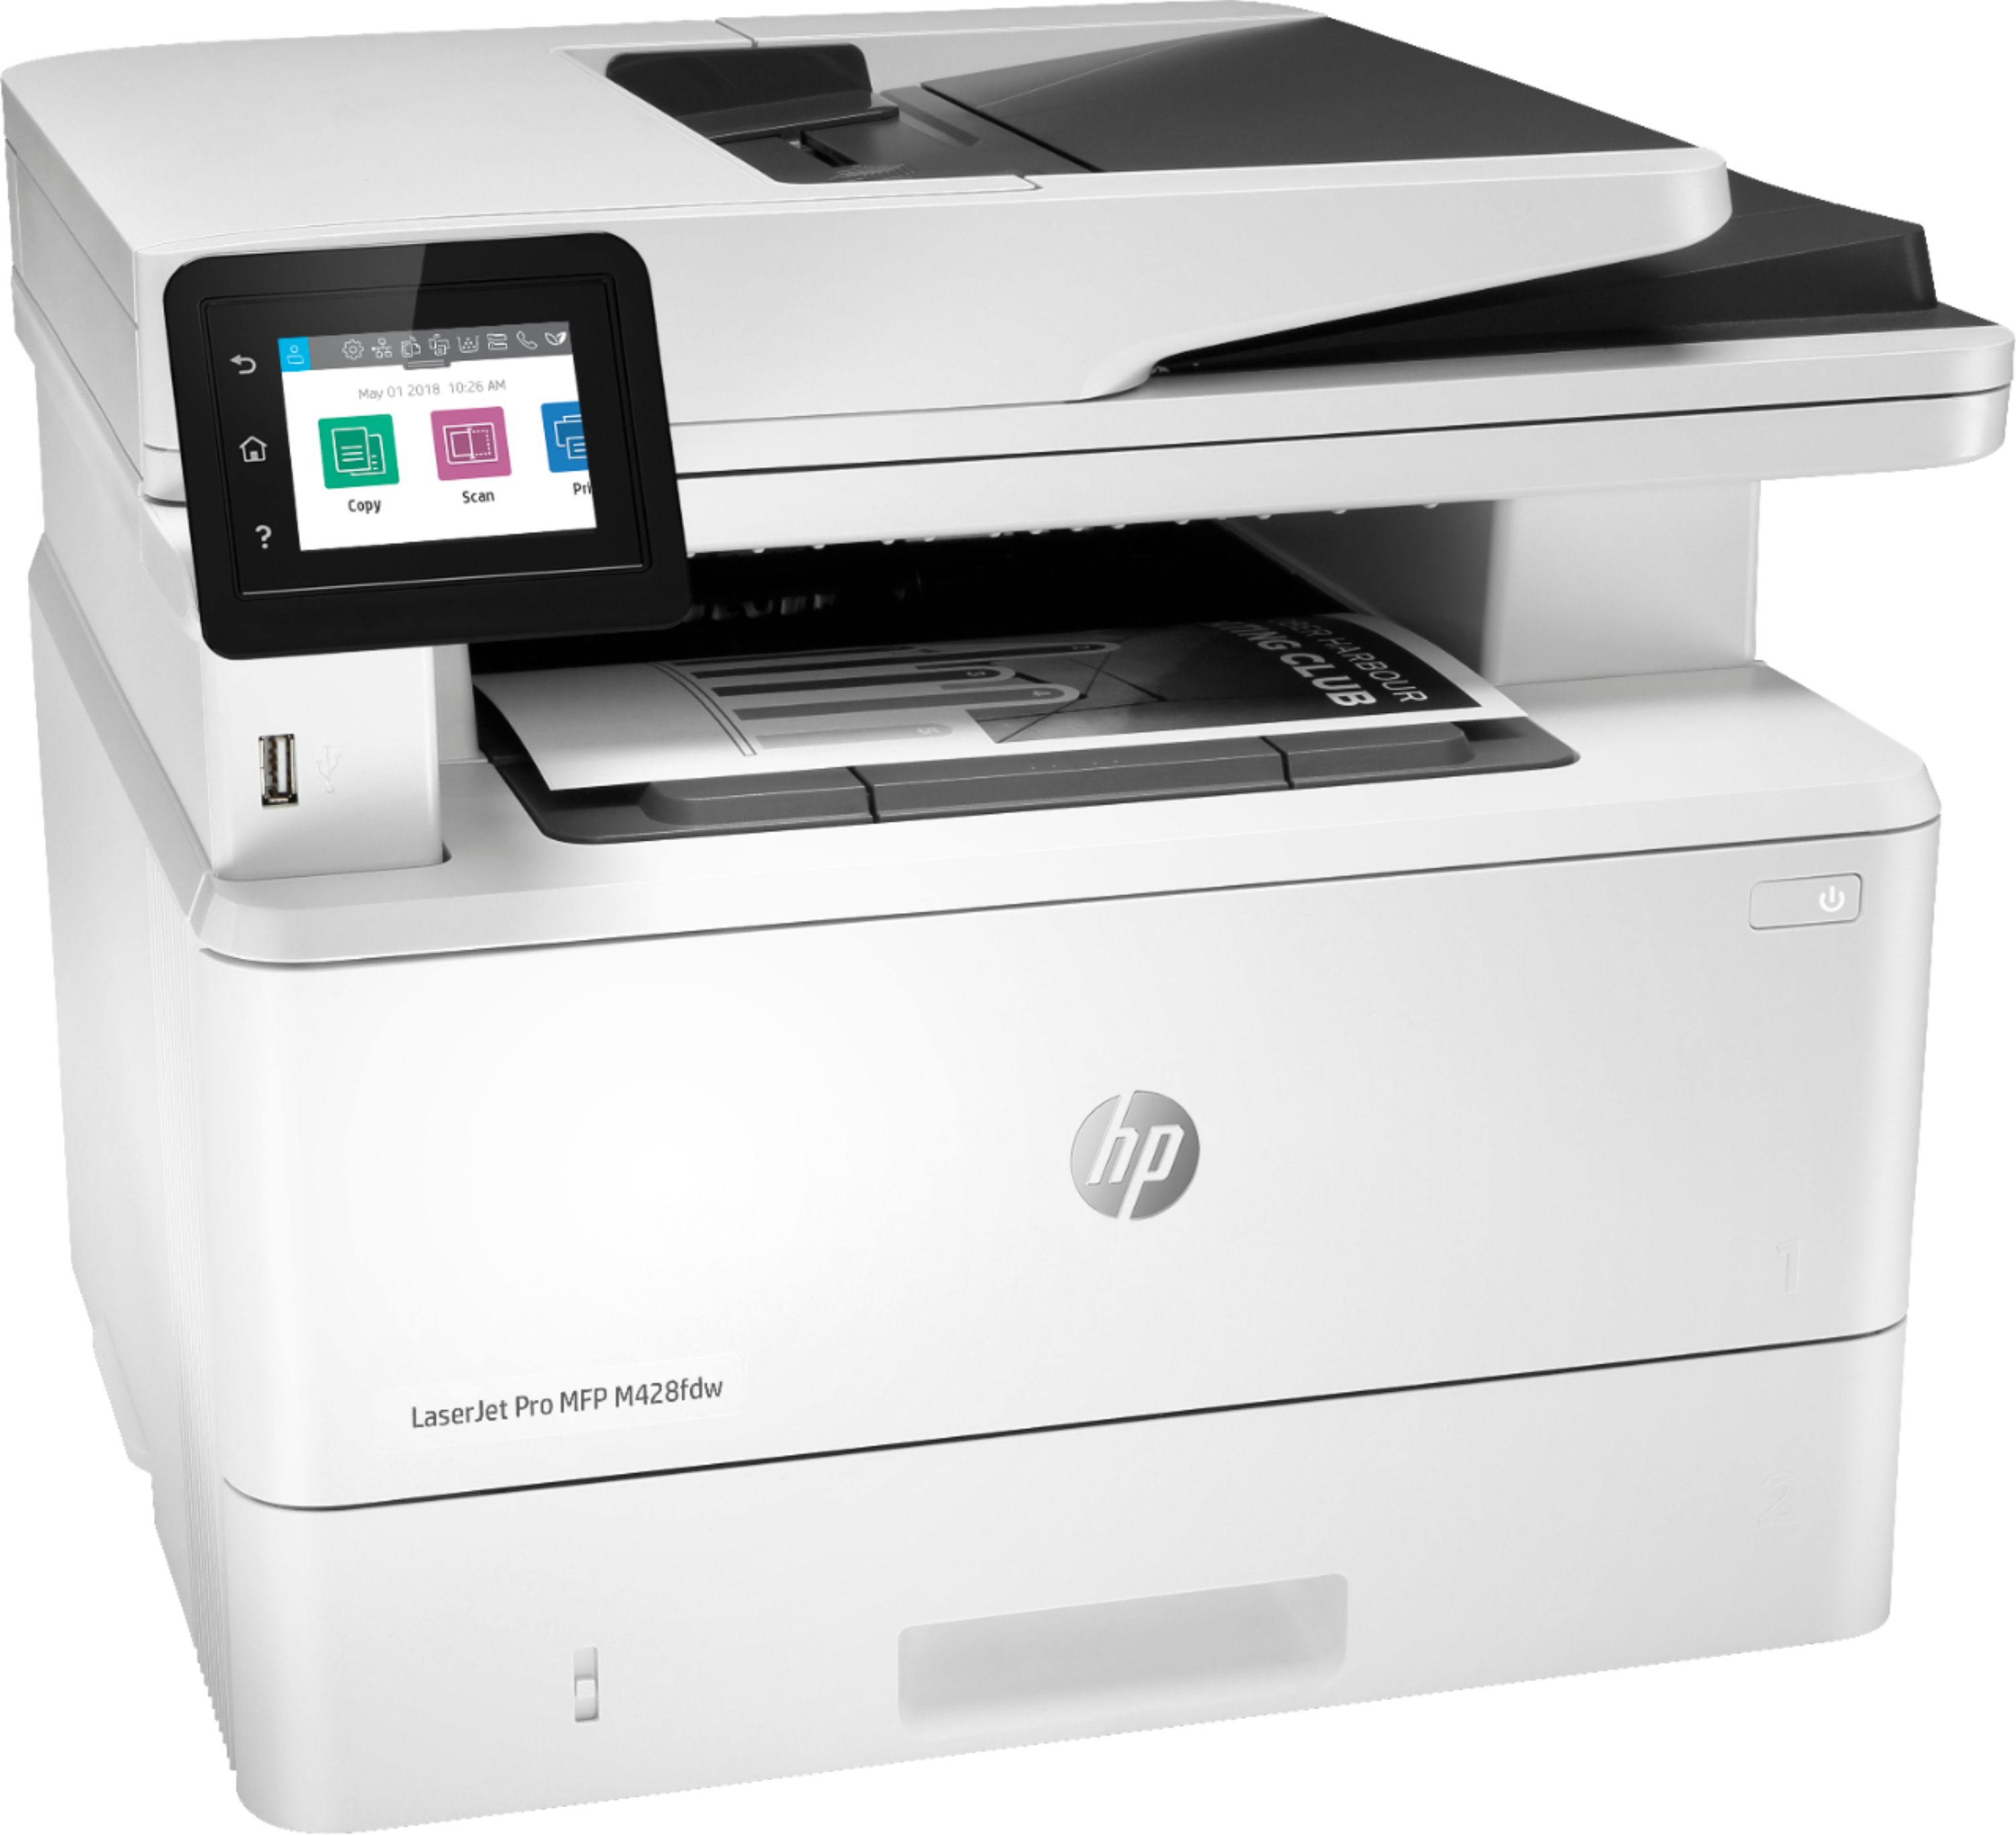 Angle View: HP - Neverstop MFP 1202w Wireless Black-And-White All-In-One Laser Printer - White